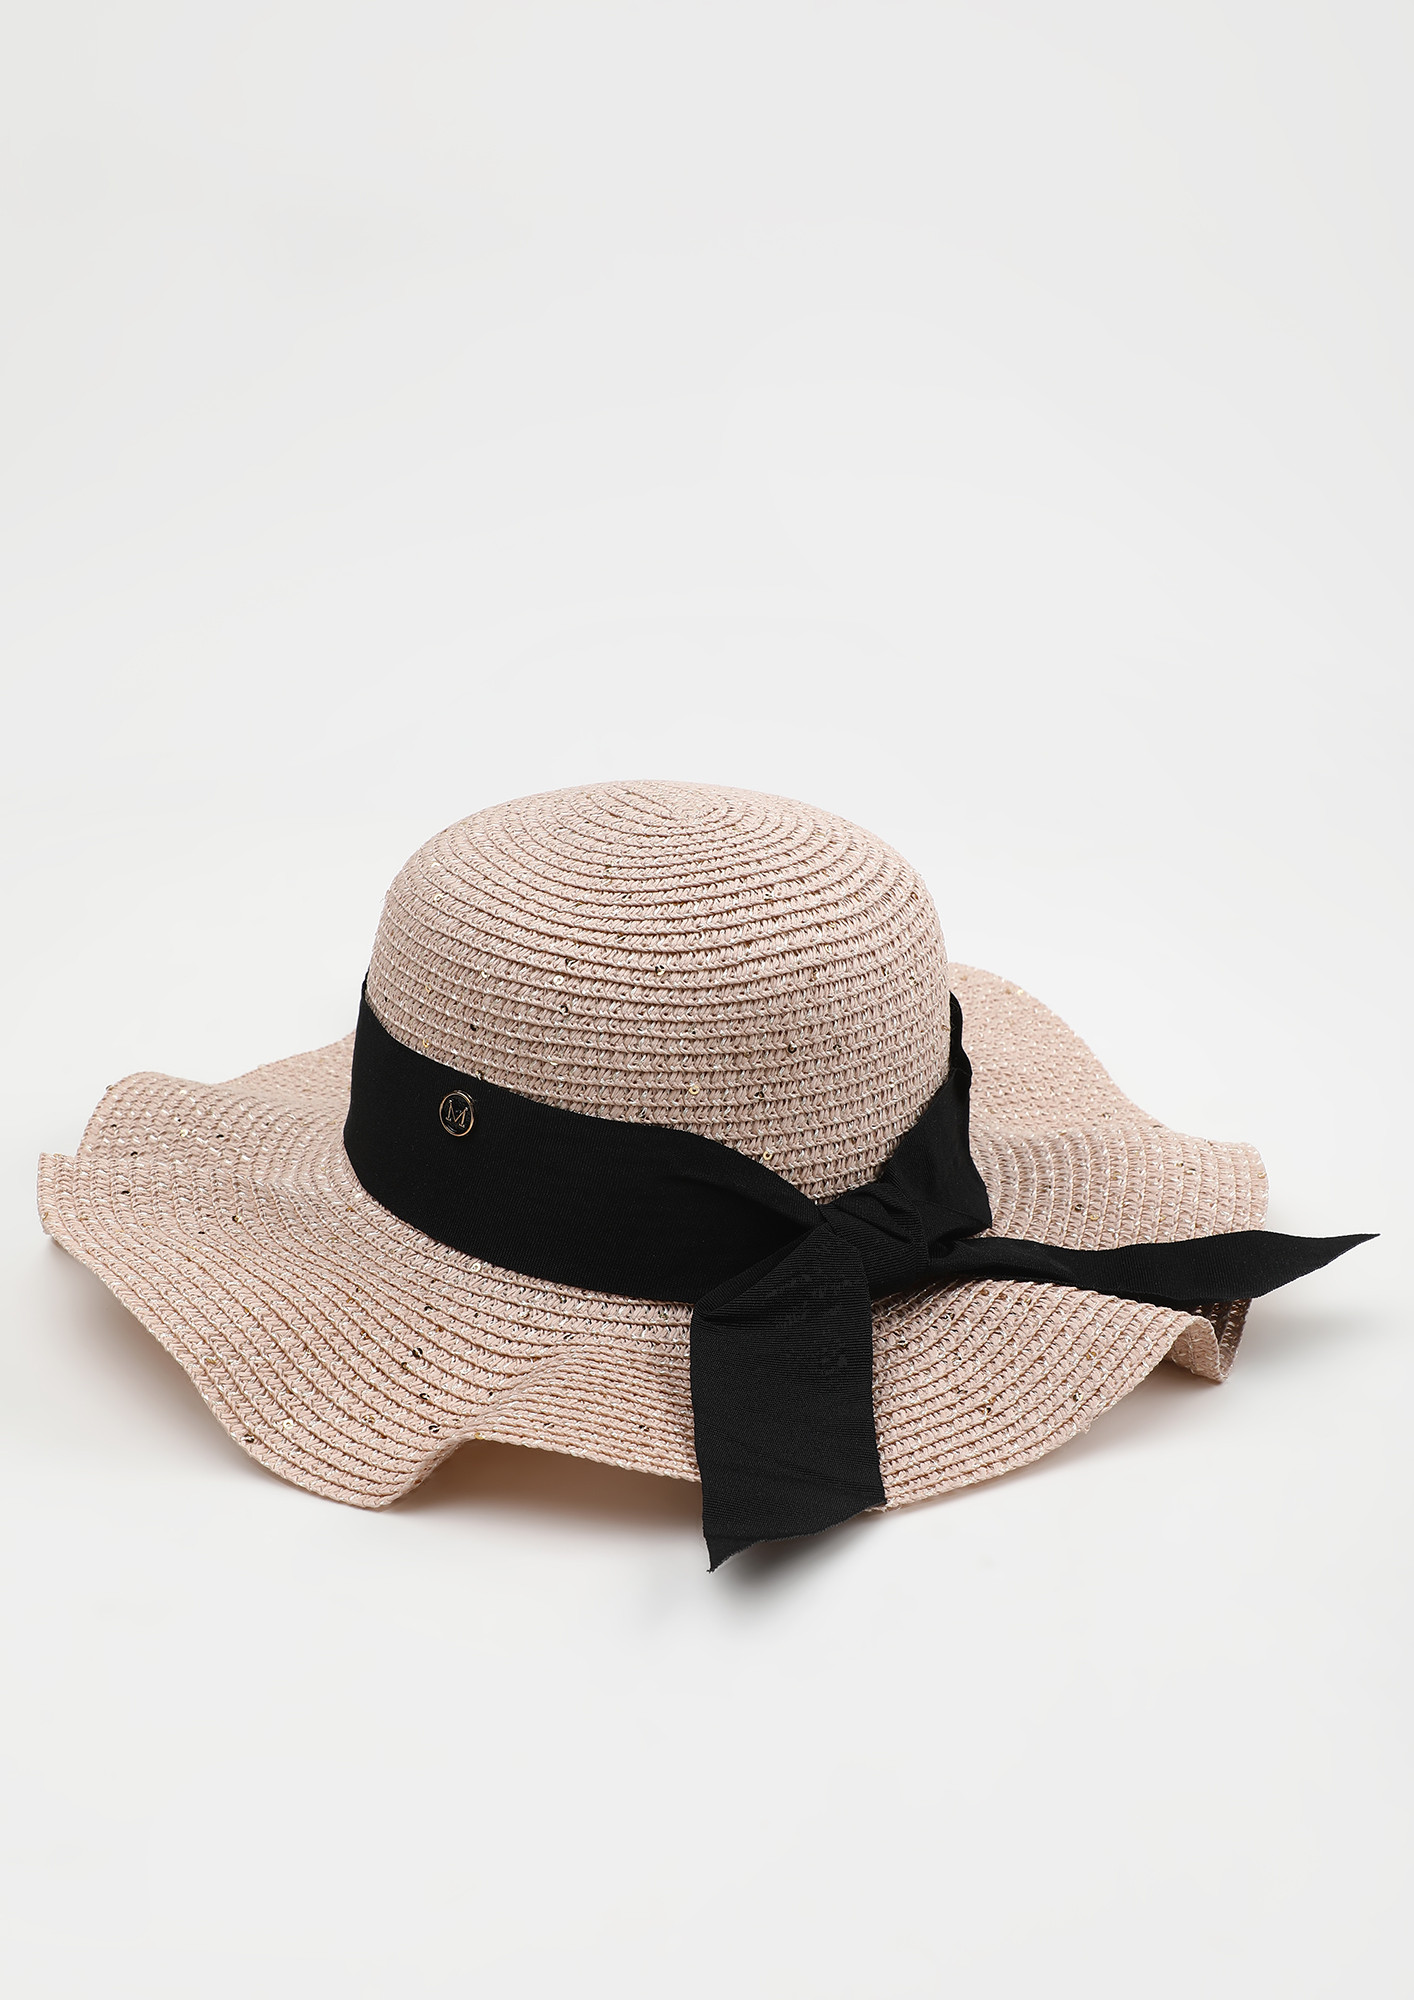 FOR SAND AND SUNSHINE  PINK FLOPPY HAT